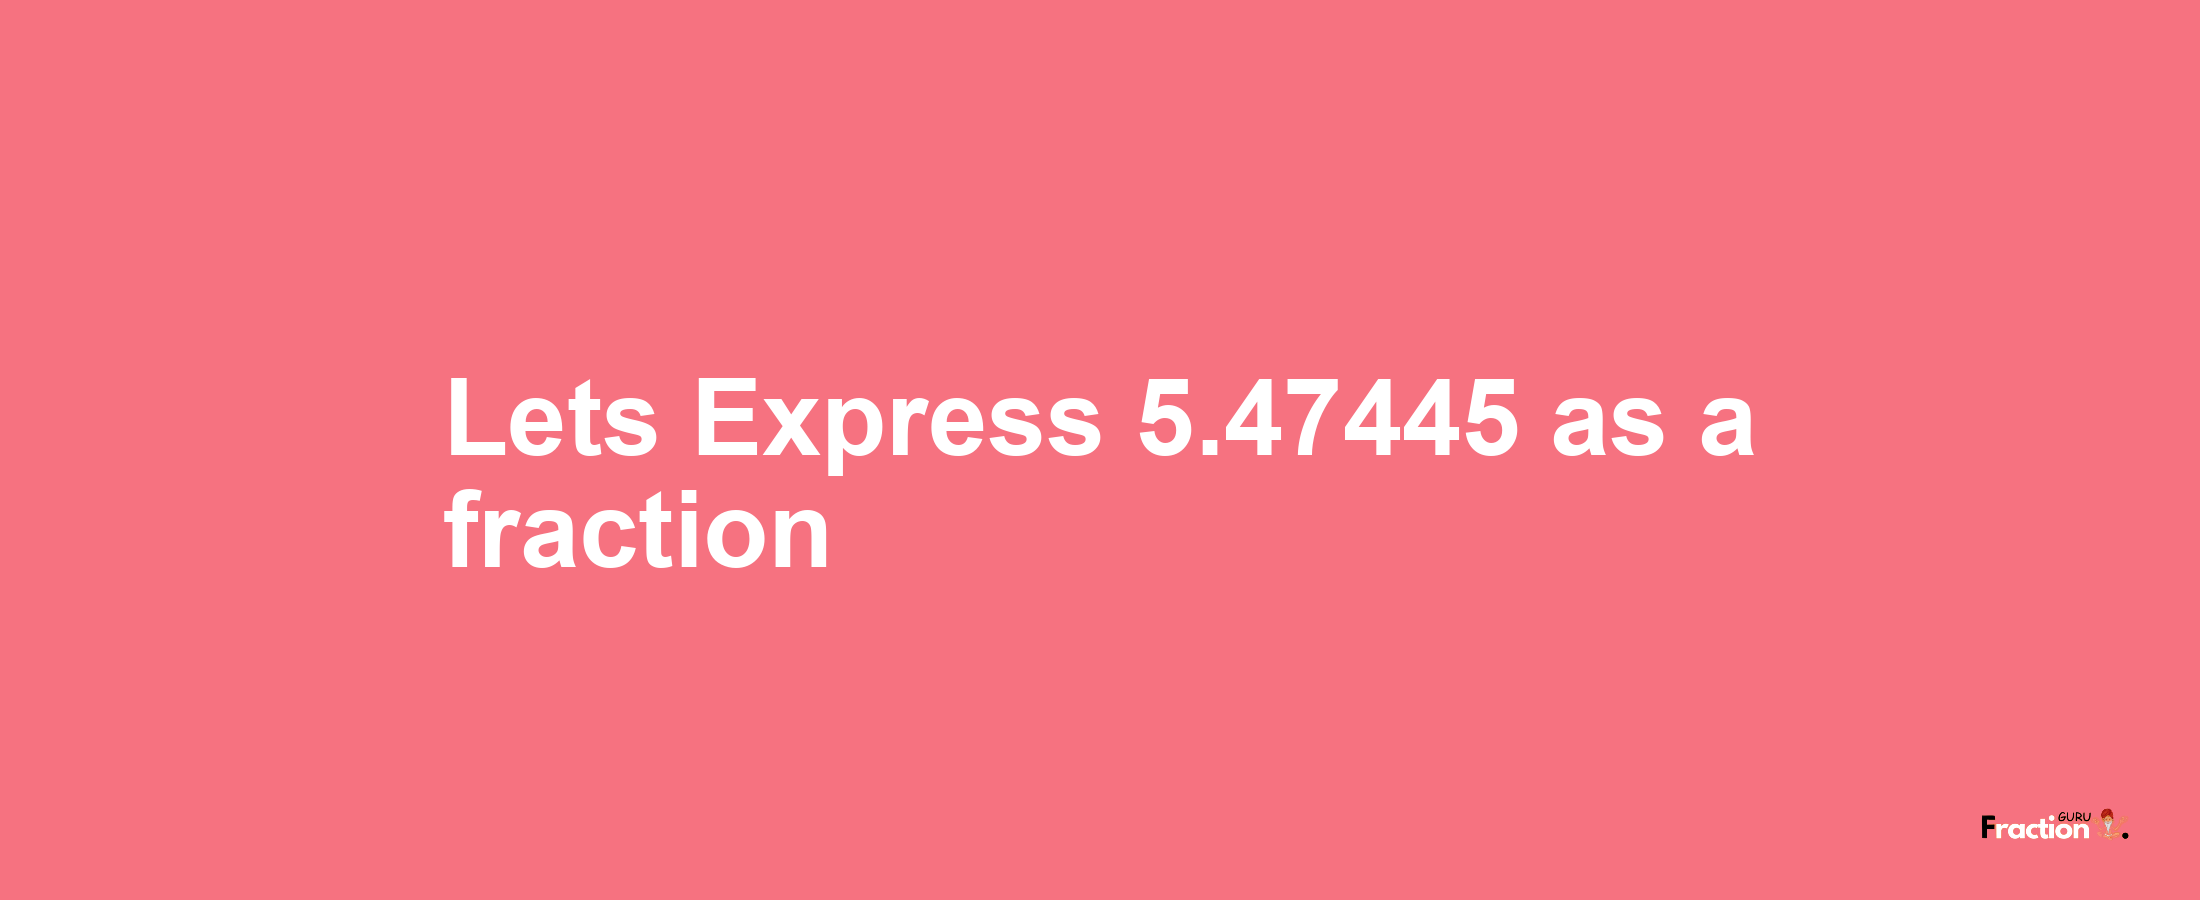 Lets Express 5.47445 as afraction